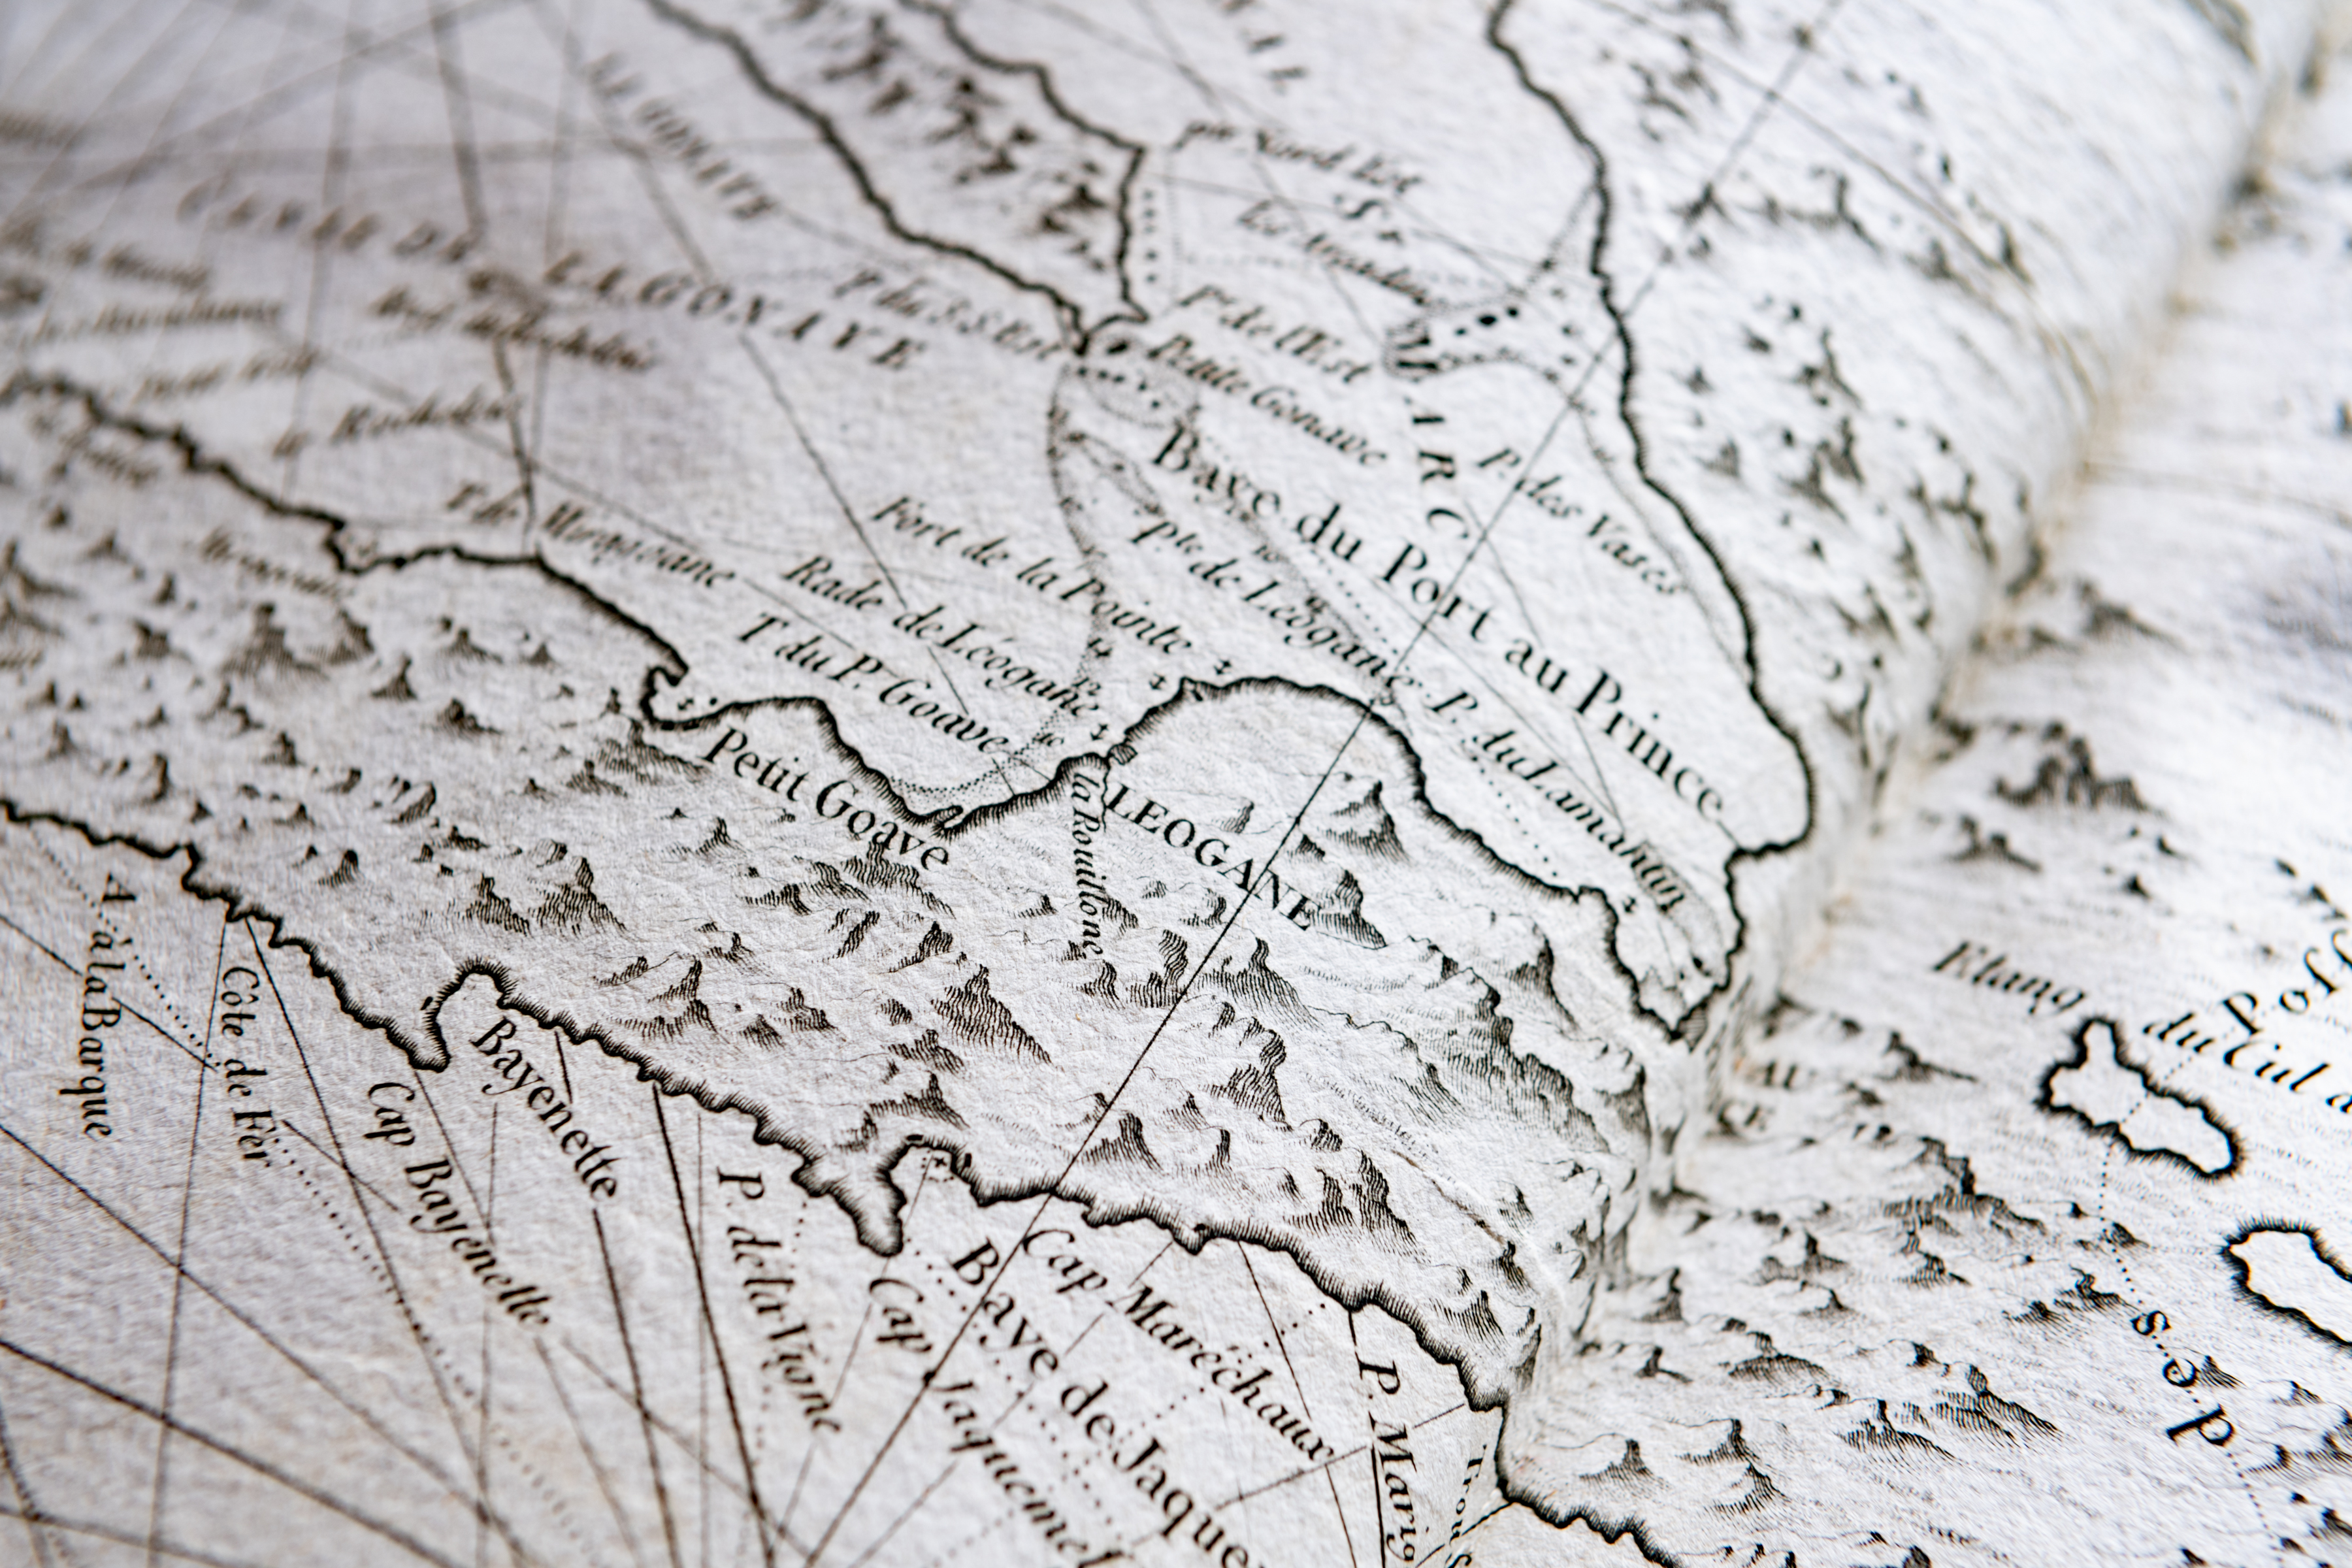 Detail of a printed map shows text in French, latitude and longitude lines, and small mountains.